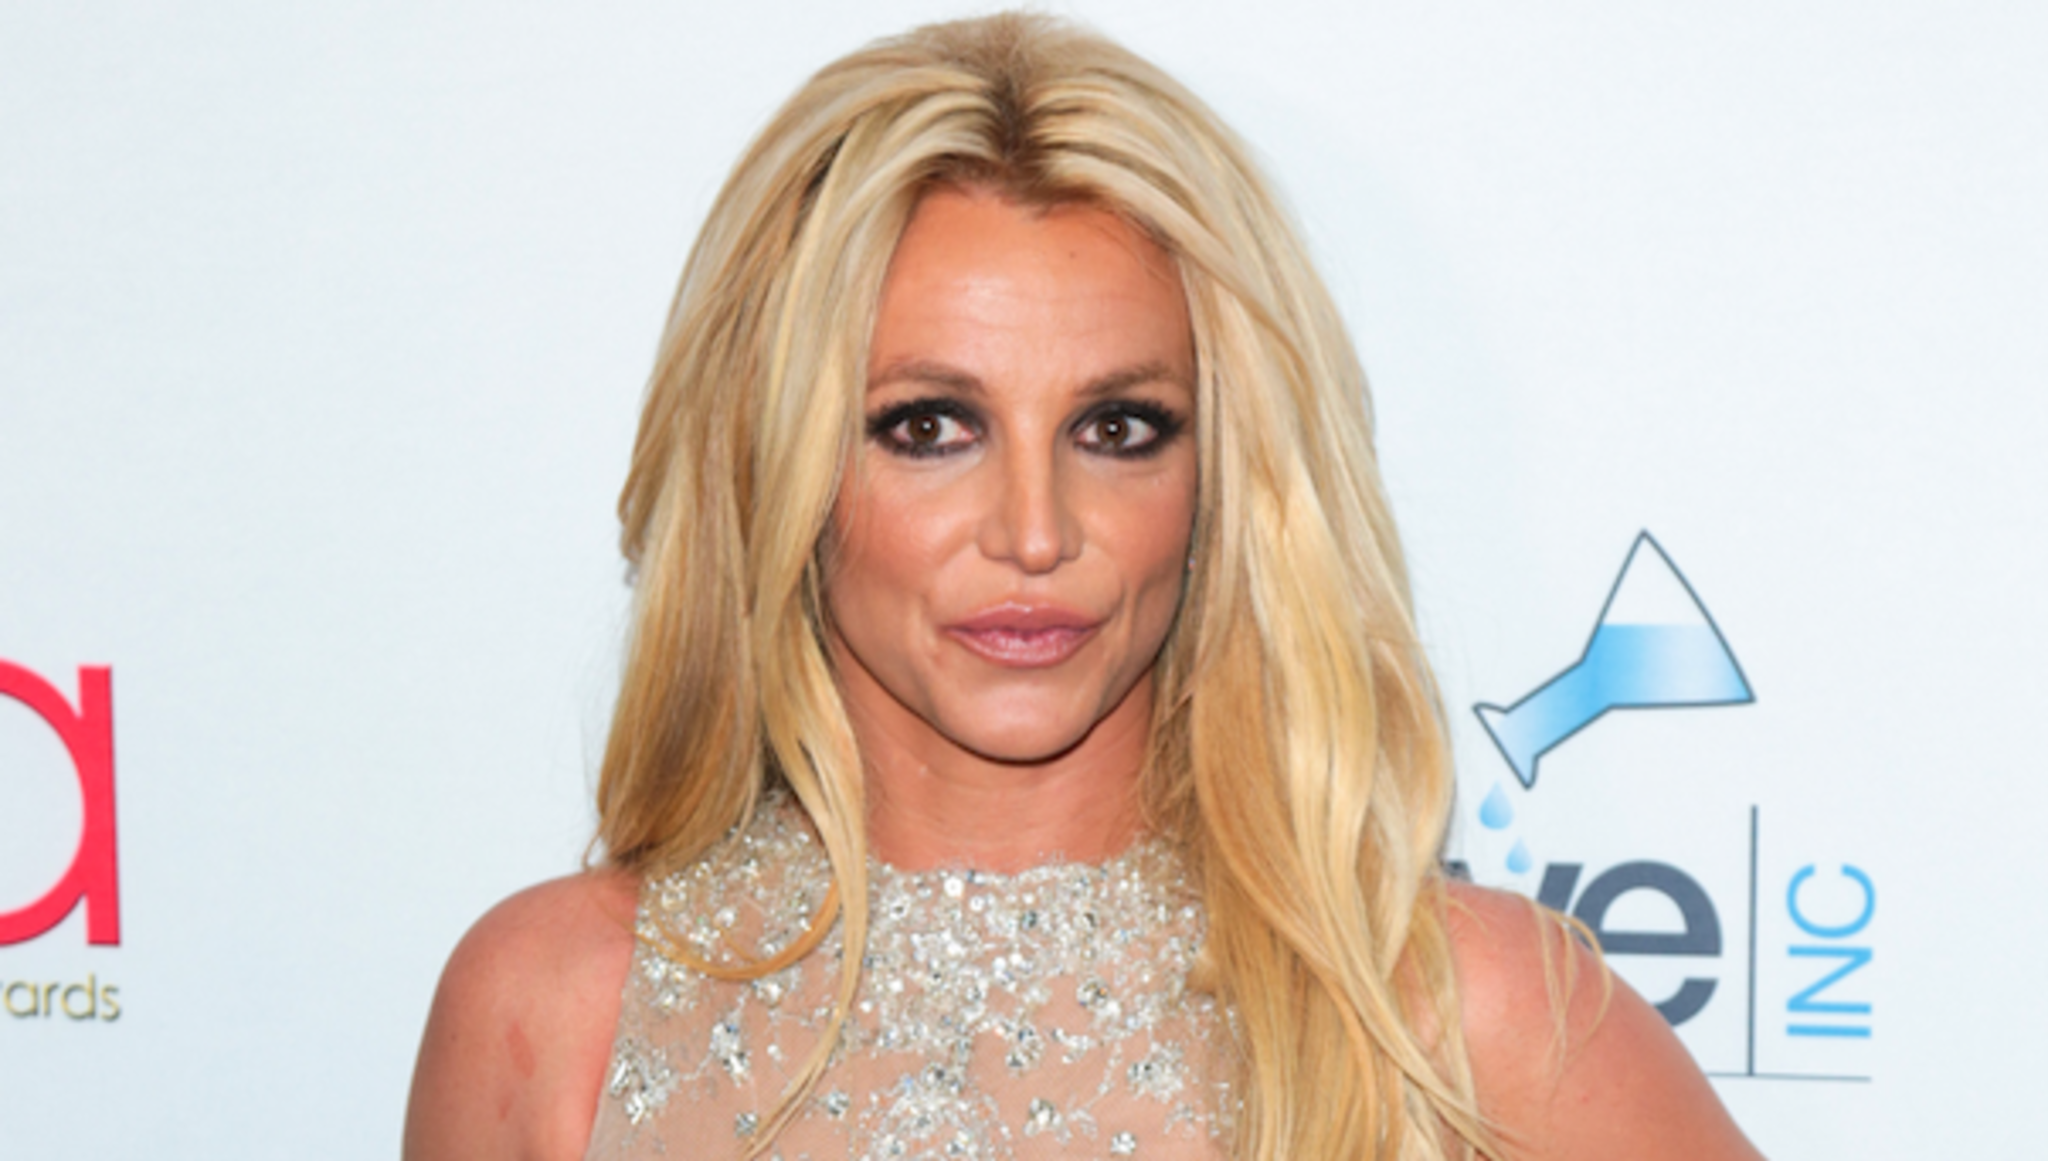 Britney Spears Shows Off Her Recent Weight Loss in Chatty New Dance Video